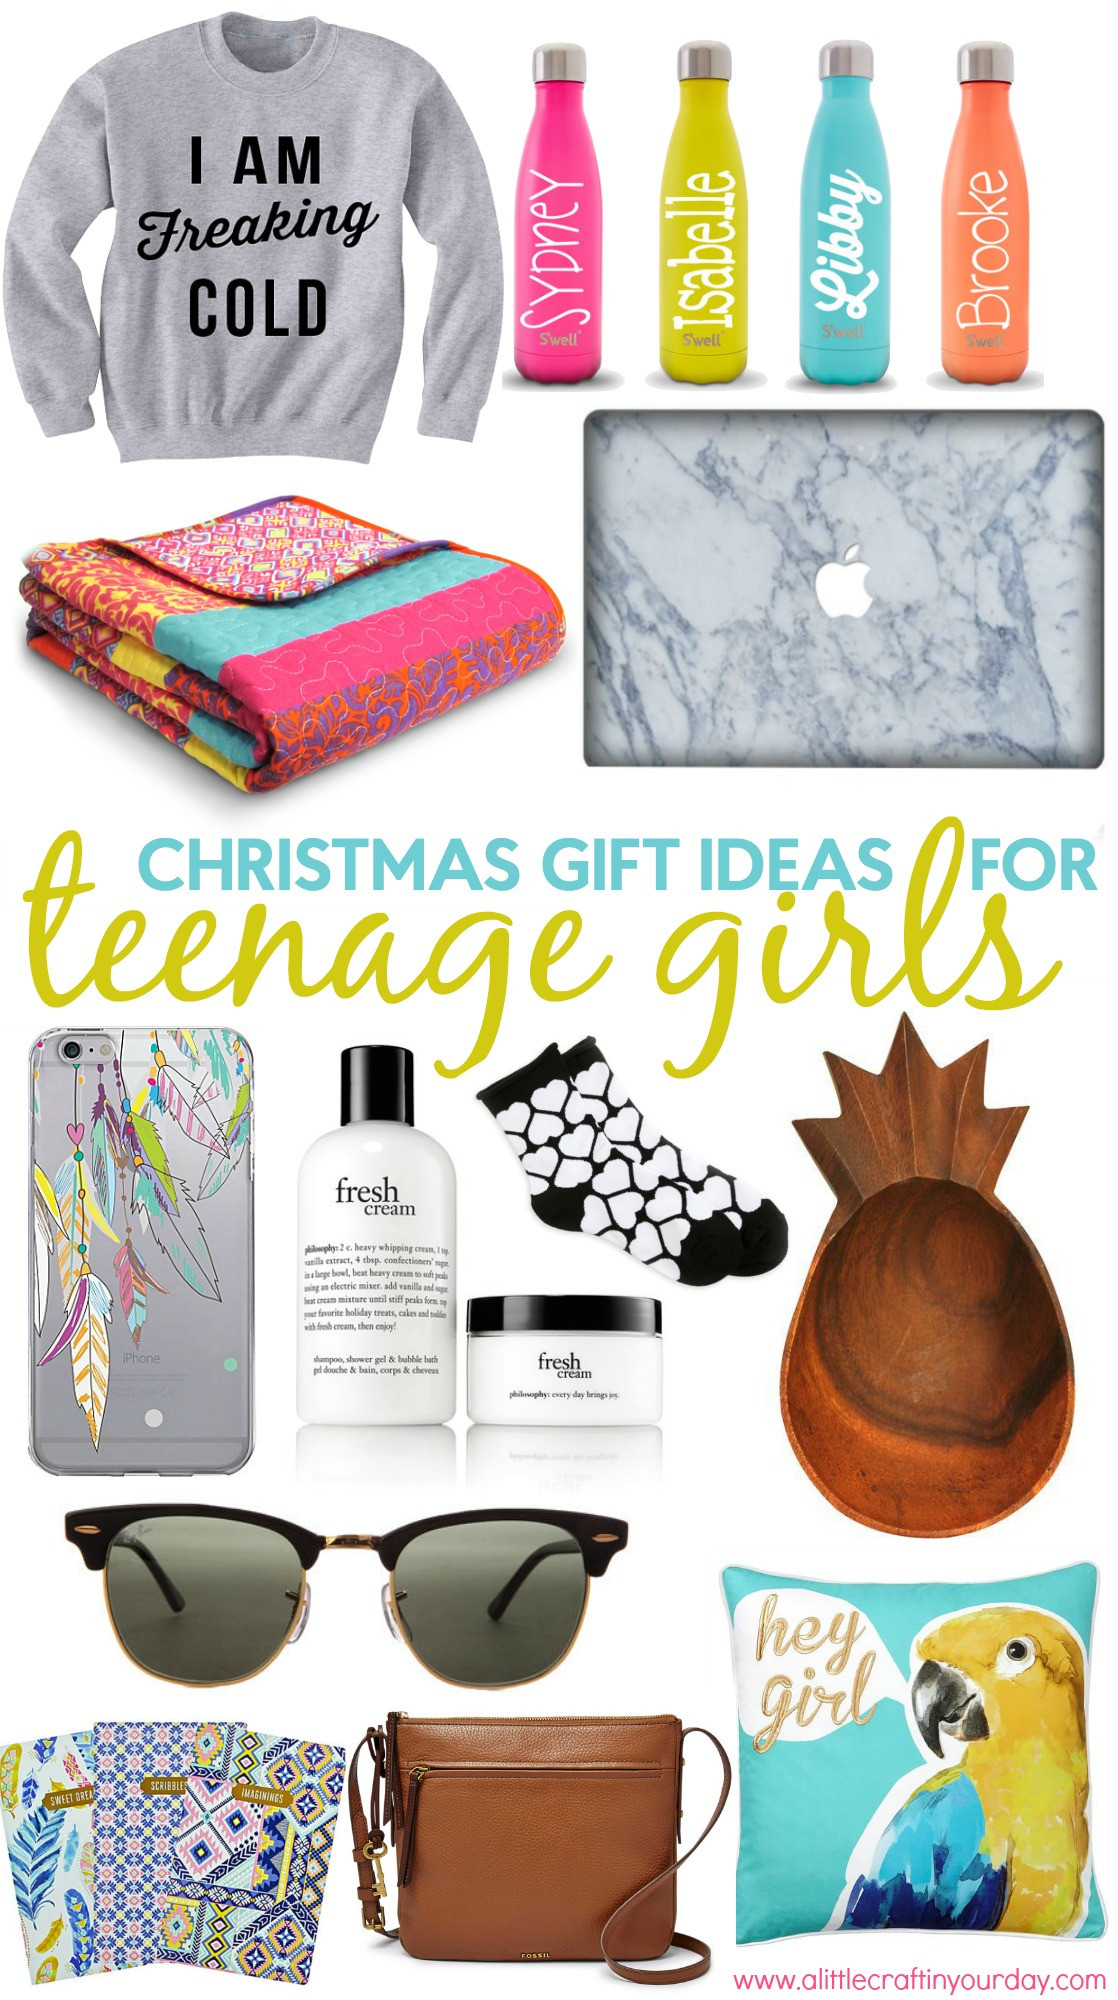 Christmas Gift Ideas For Teenagers
 Christmas Gift Ideas for Teen Girls A Little Craft In